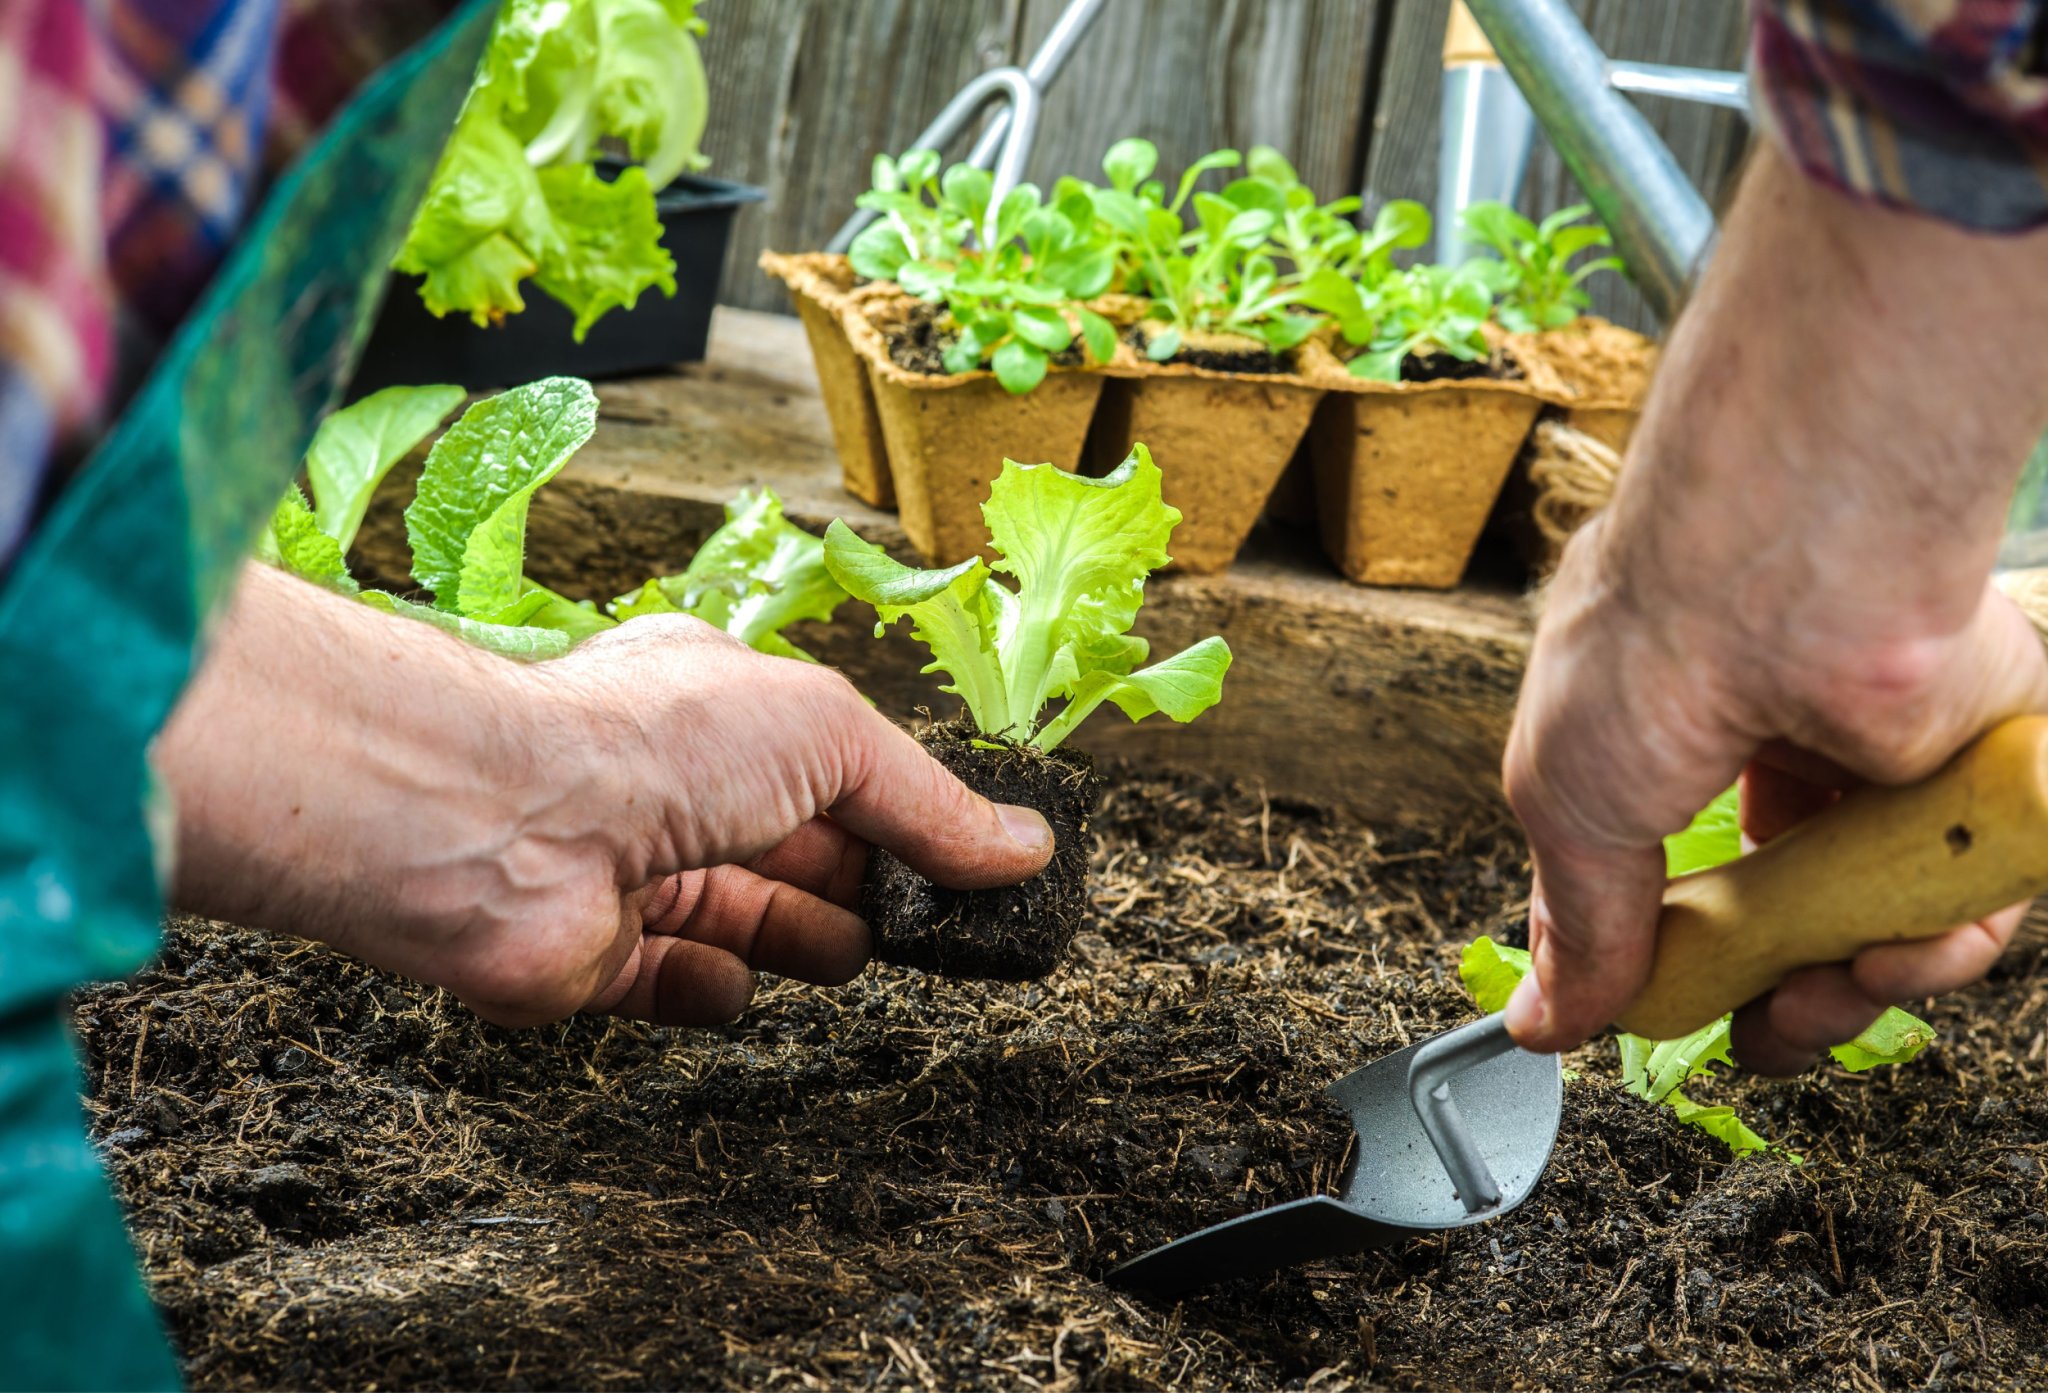 5 Steps To Starting a Vegetable Garden From Scratch